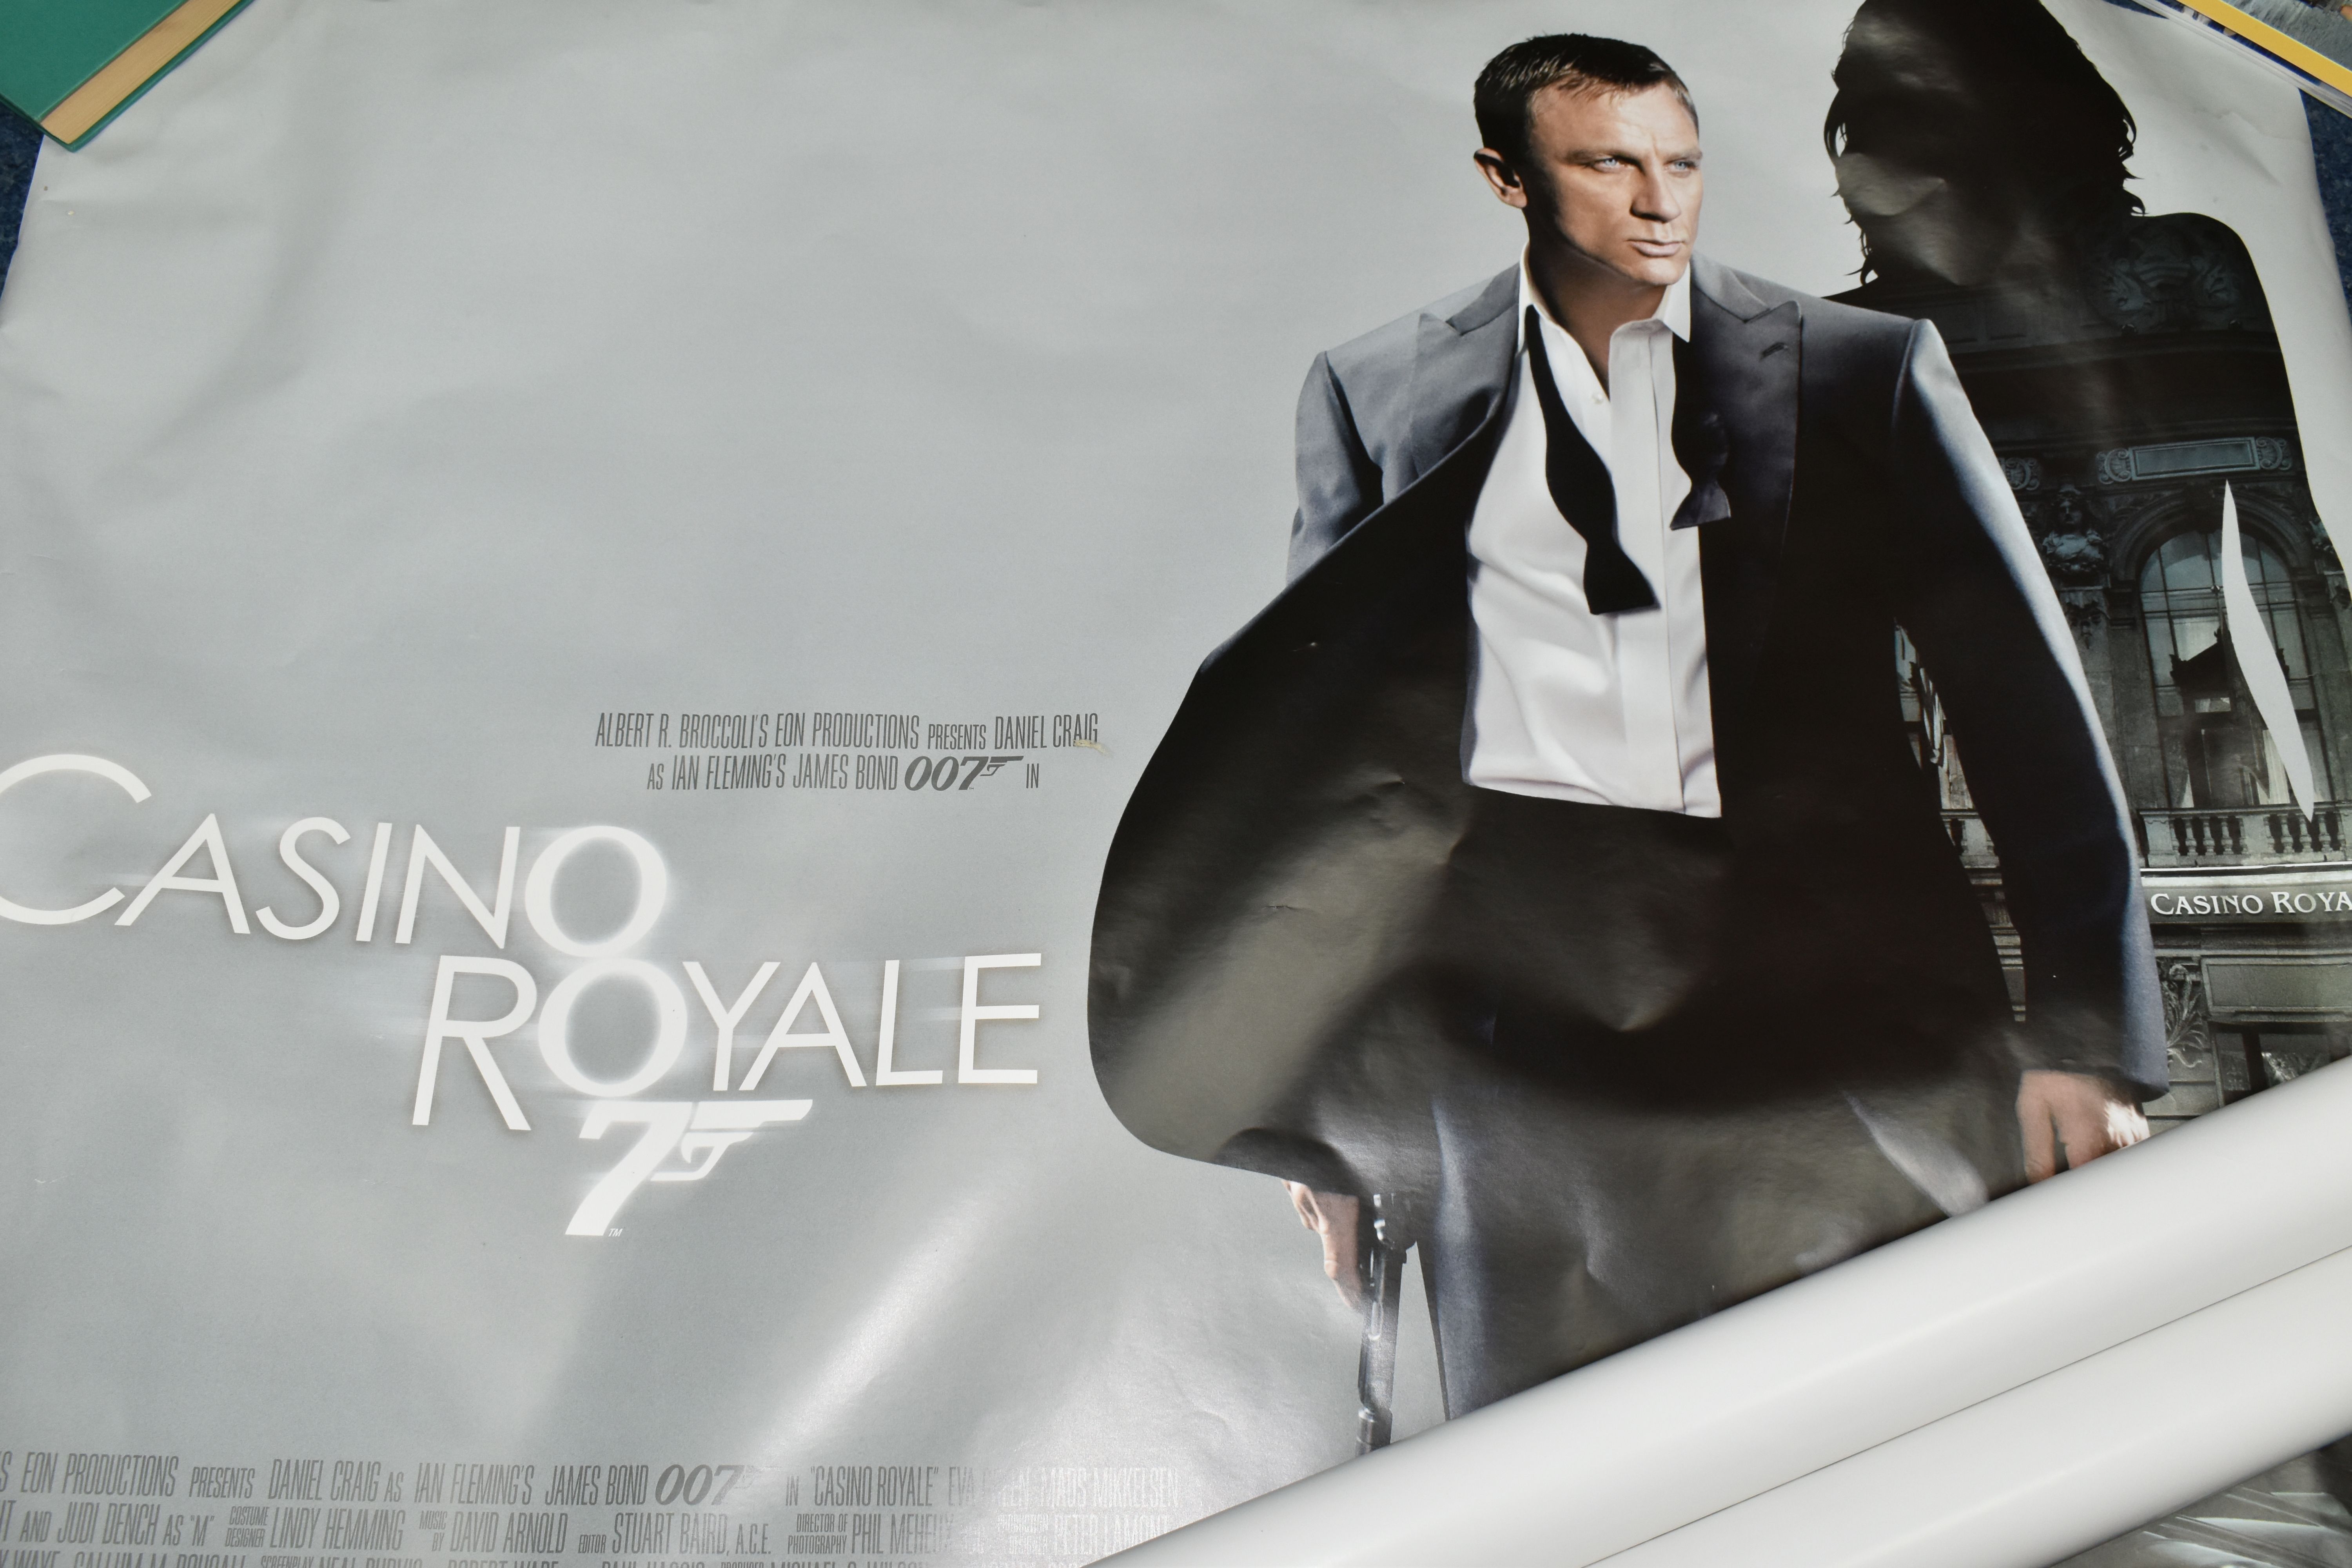 A '007' ILLUMINATED HANGING DECORATION AND TWO JAMES BOND POSTERS FOR CASINO ROYALE AND DIE - Image 4 of 4